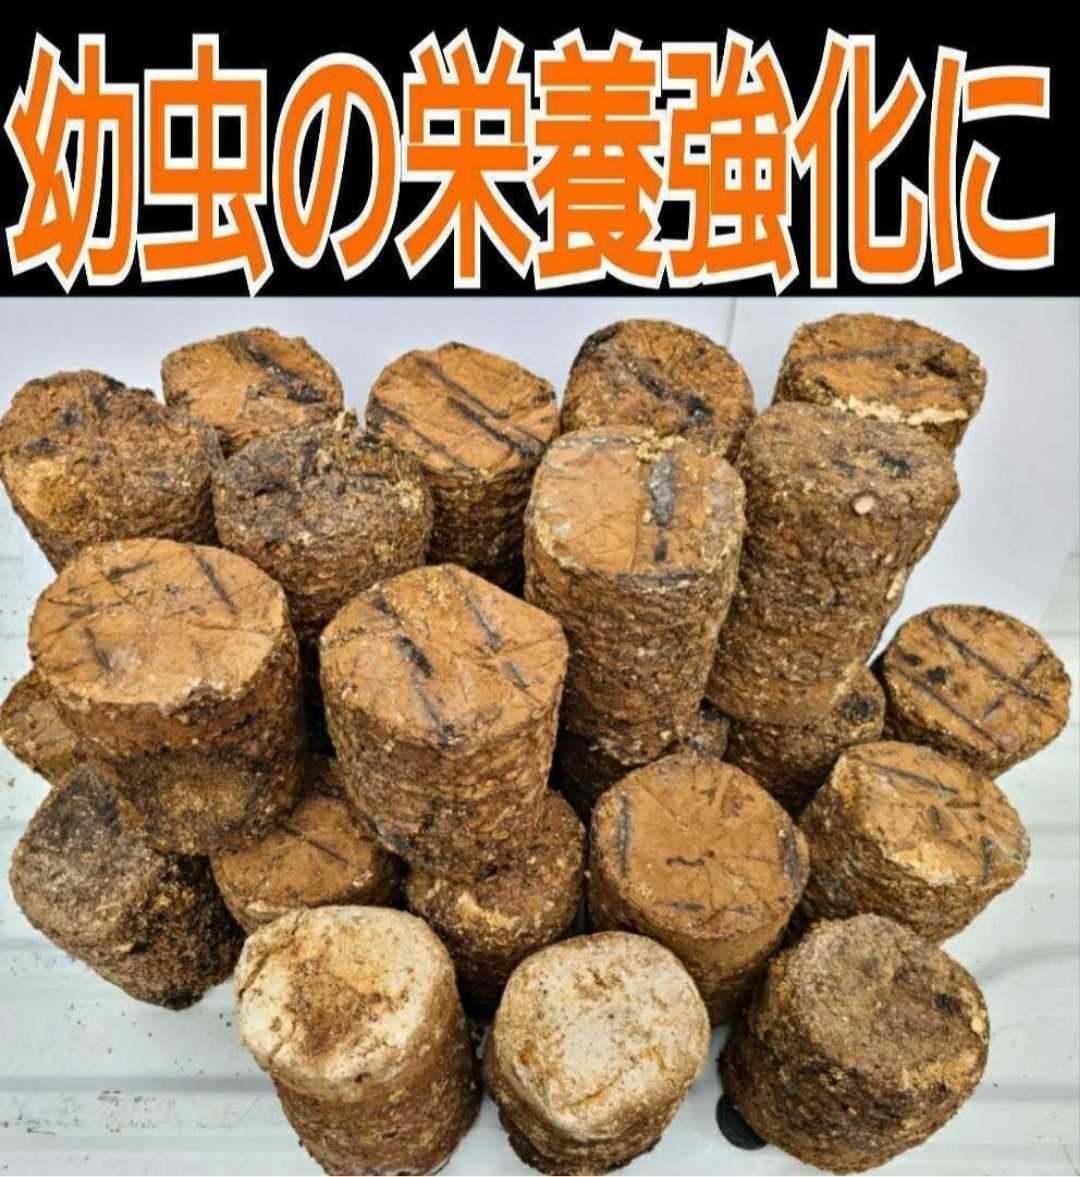  time sale! great special price!... floor block 25 piece * rhinoceros beetle larva. nutrition strengthen .! mat . embed .mo Limo li meal .. on a grand scale become! sawtooth oak, 100%!